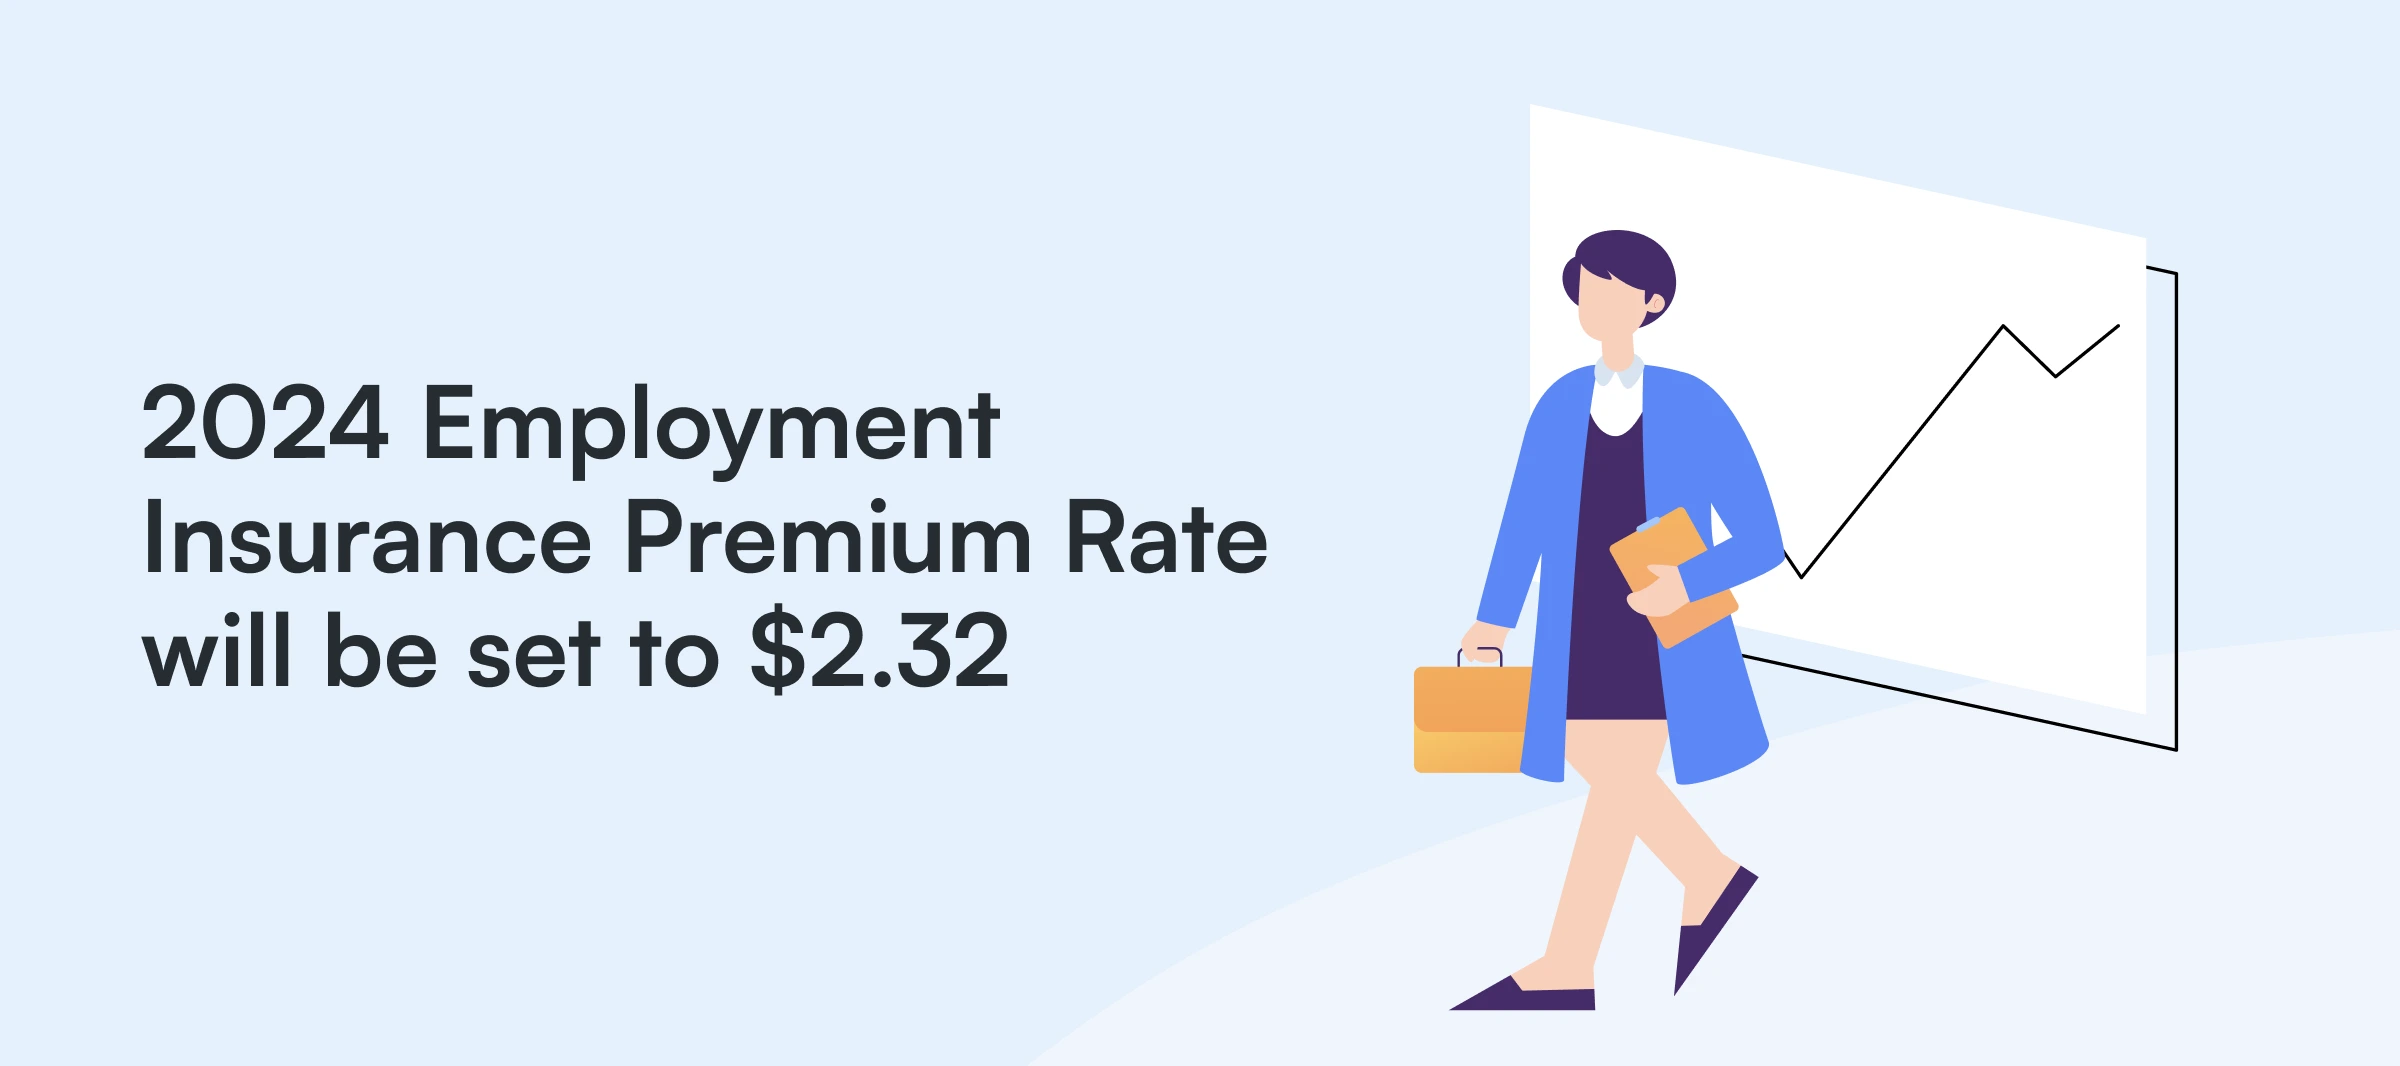 2024 Employment Insurance Premium Rate will be set to $2.32